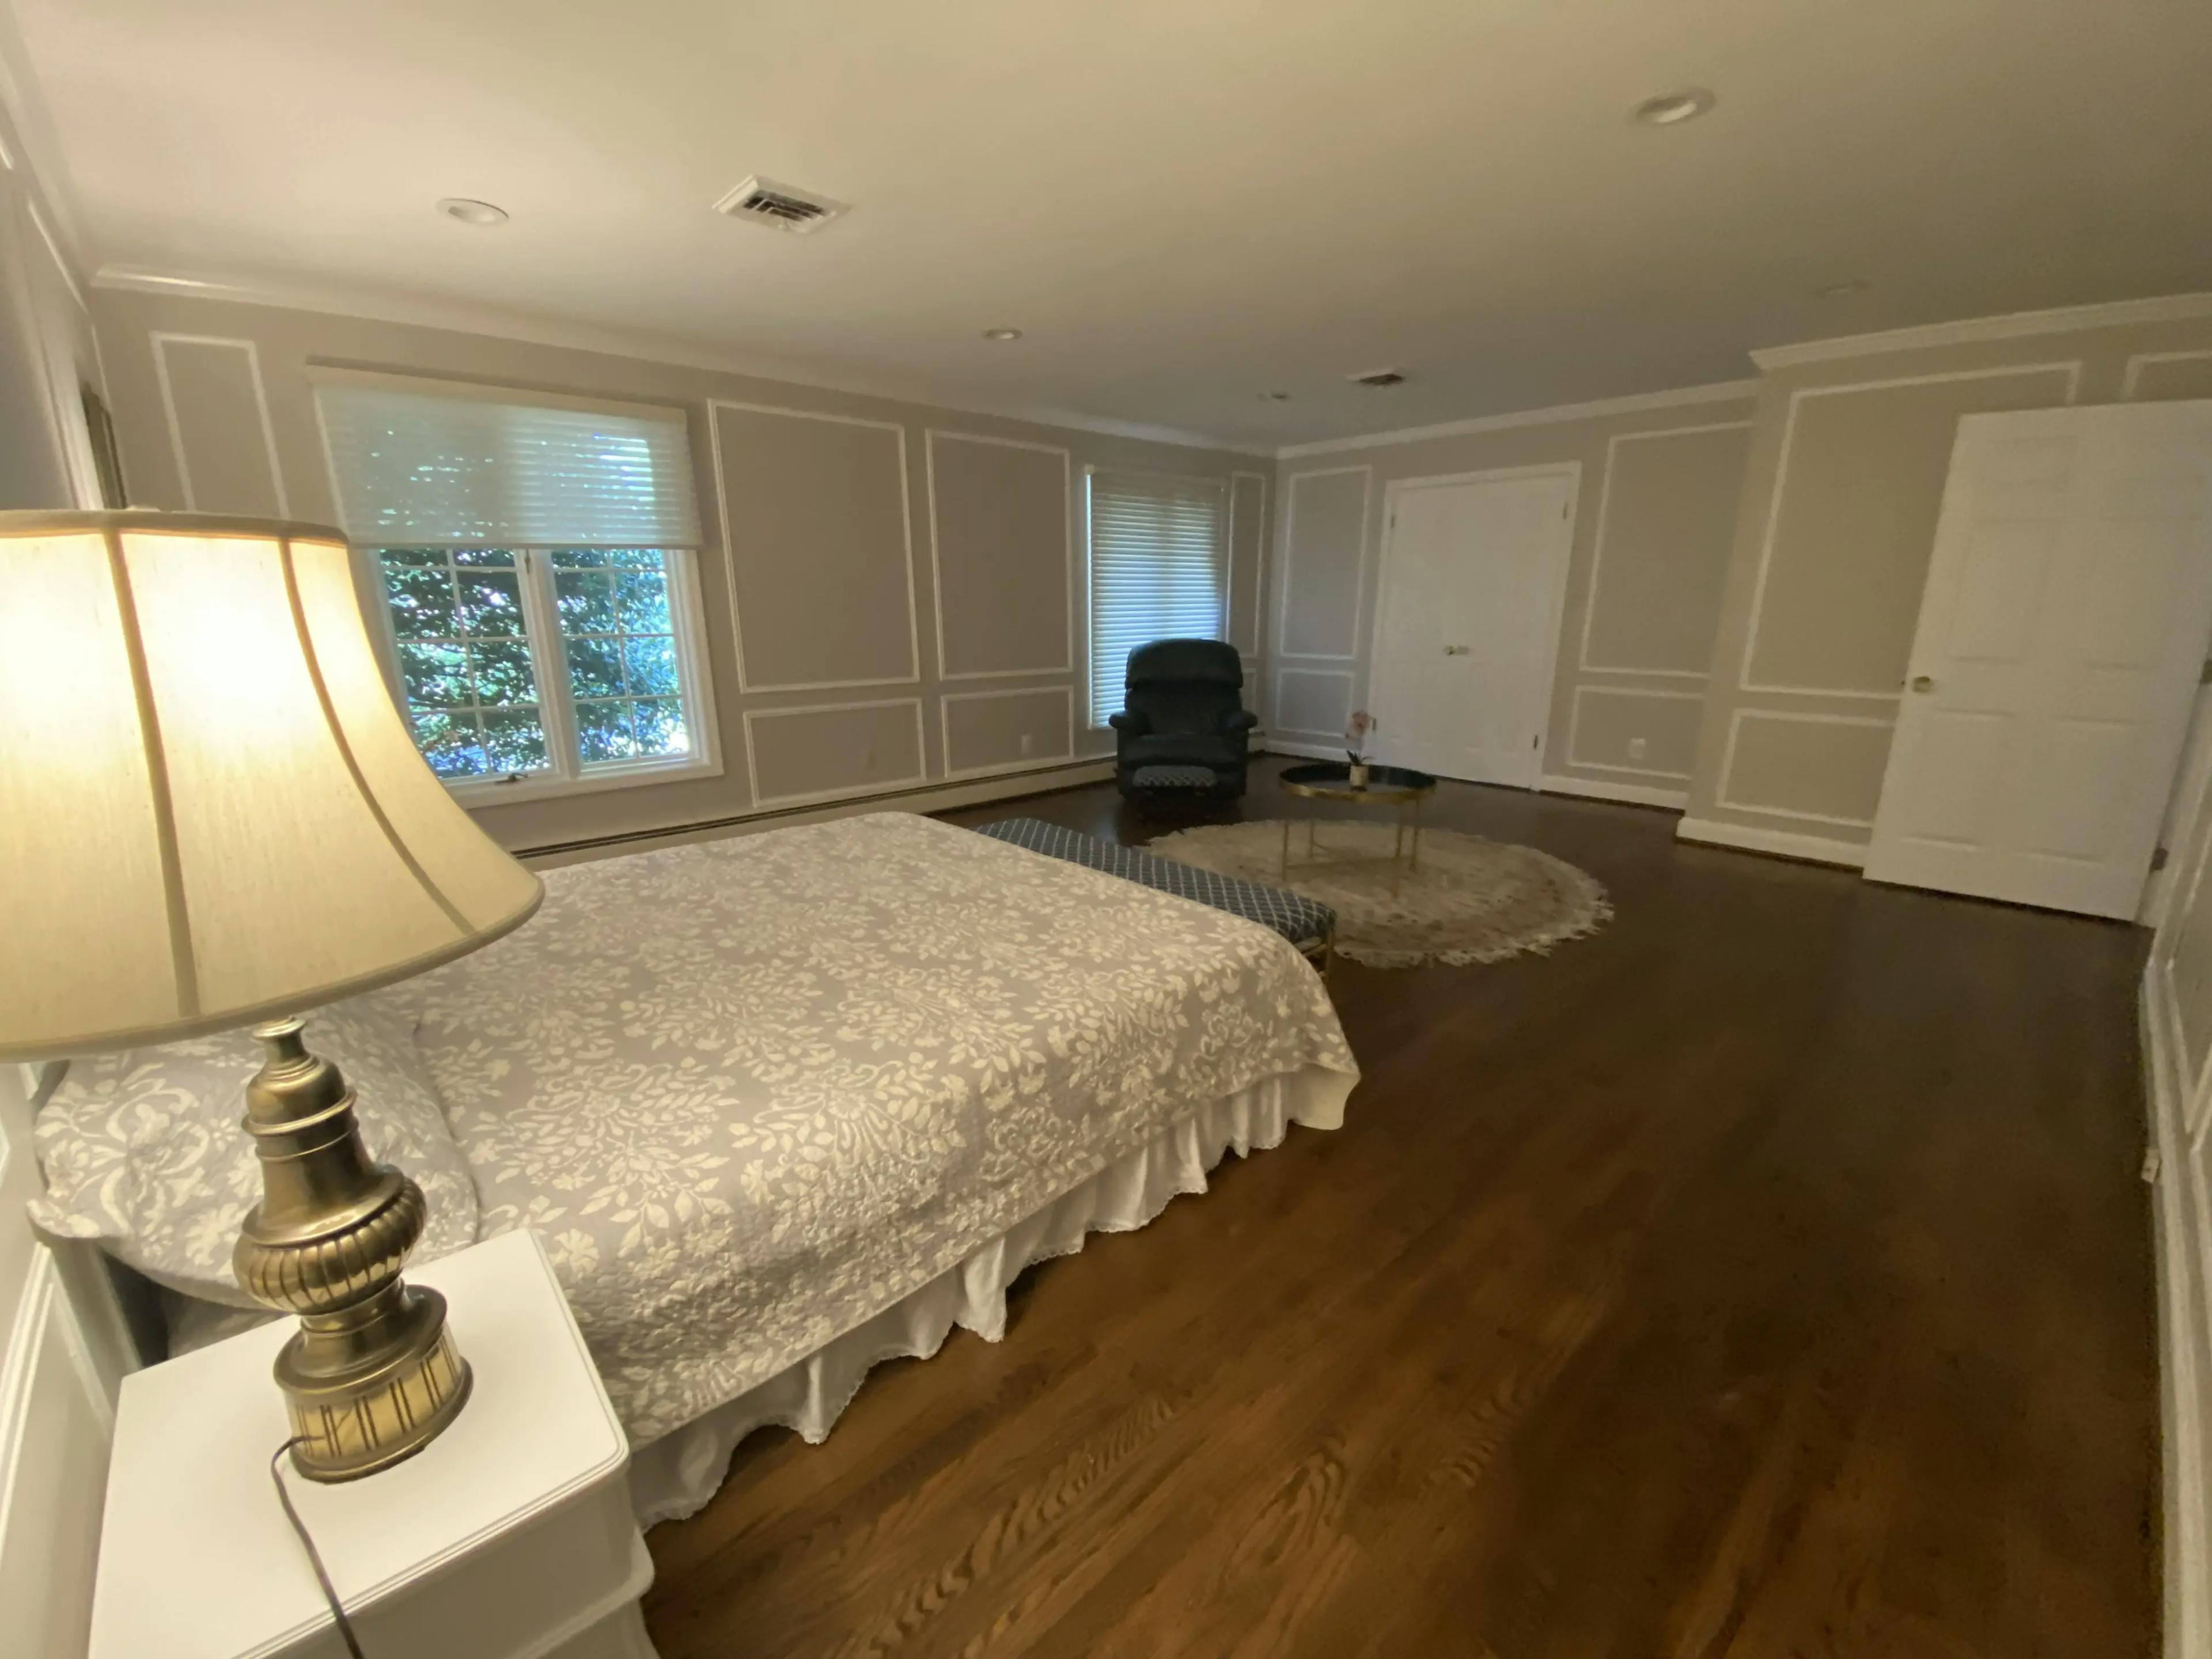 Westmont Suite - A Private, Spacious Room